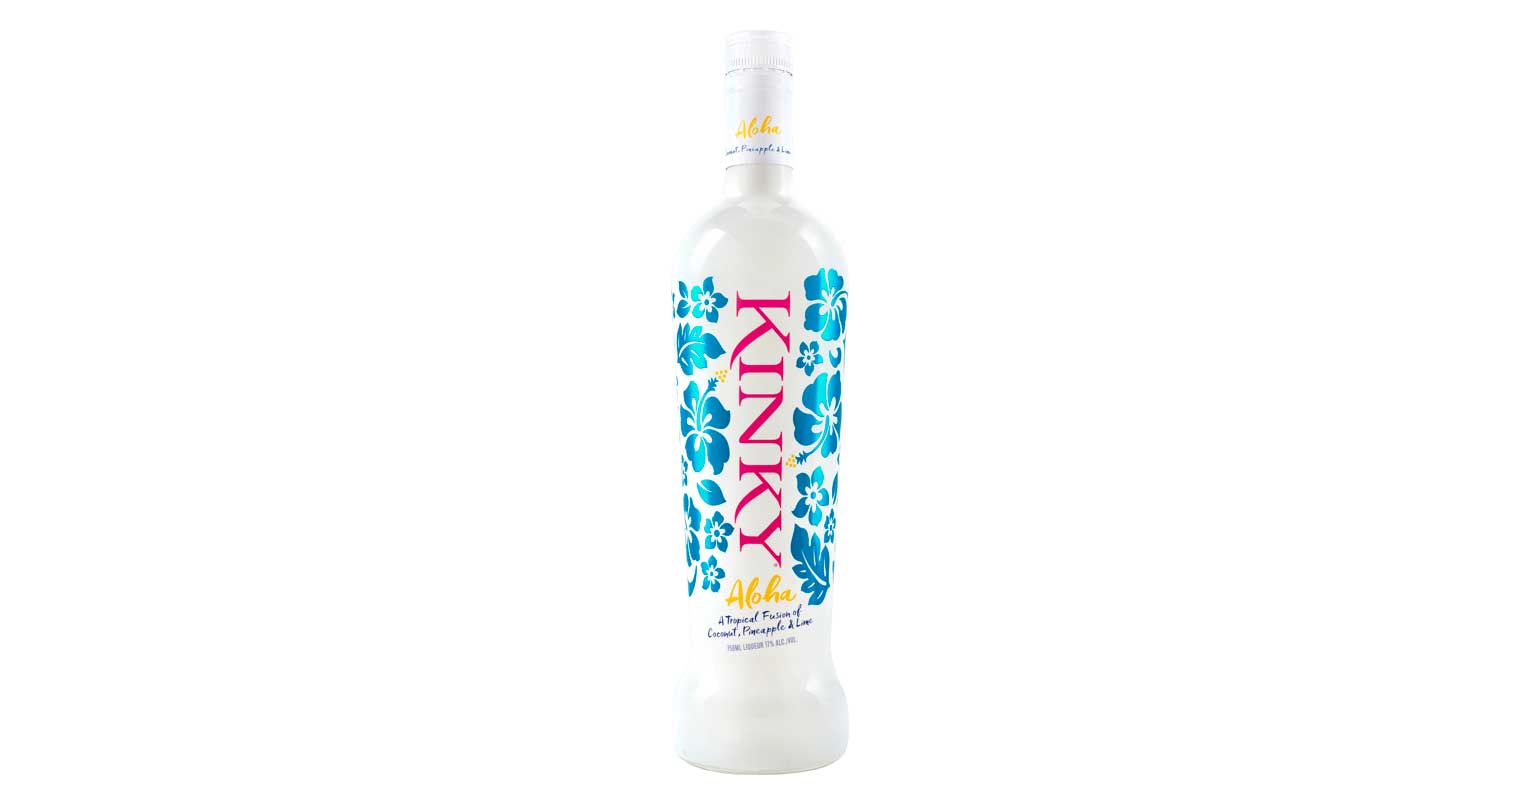 KINKY Aloha launches, bottle on white, featured image